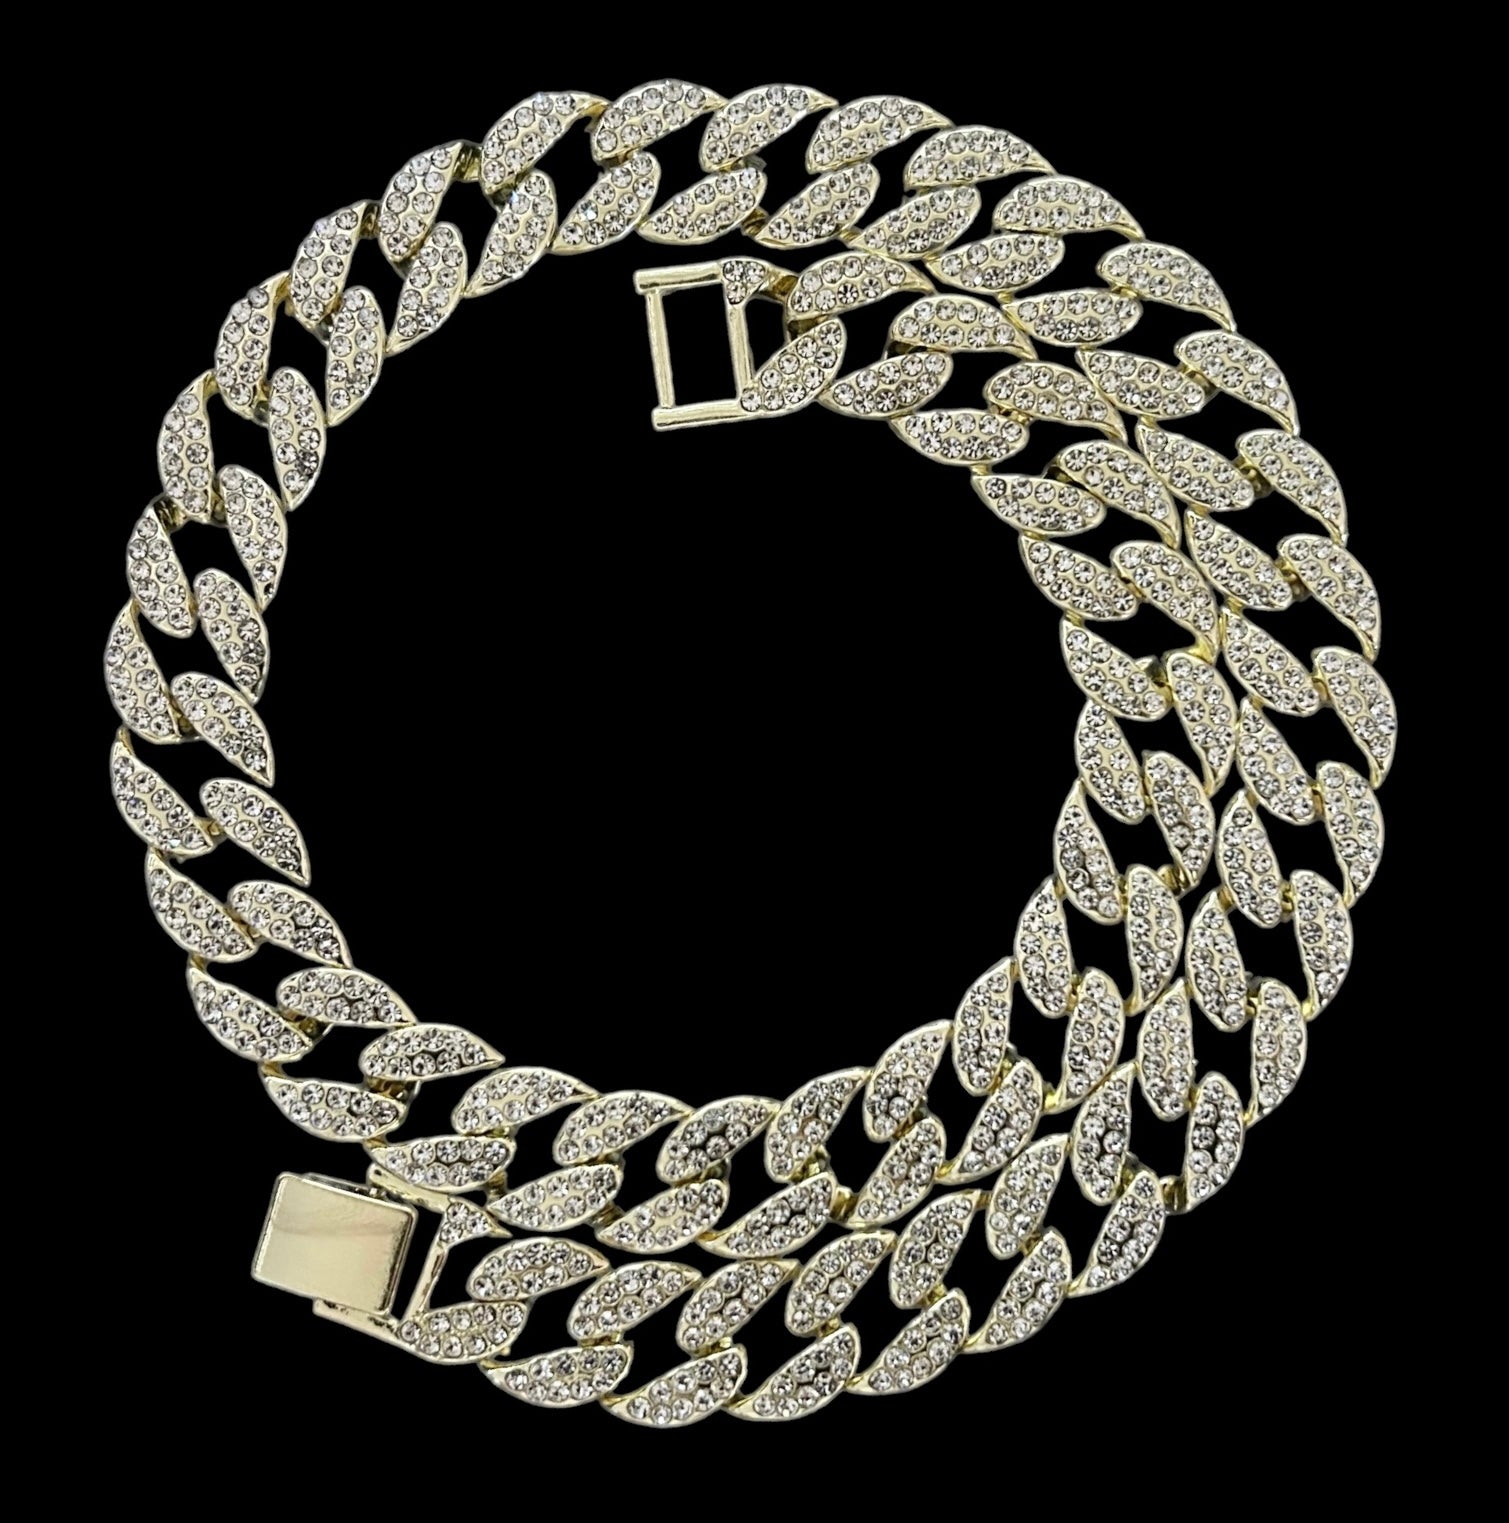 NECKLACE – DAZZLING ICE